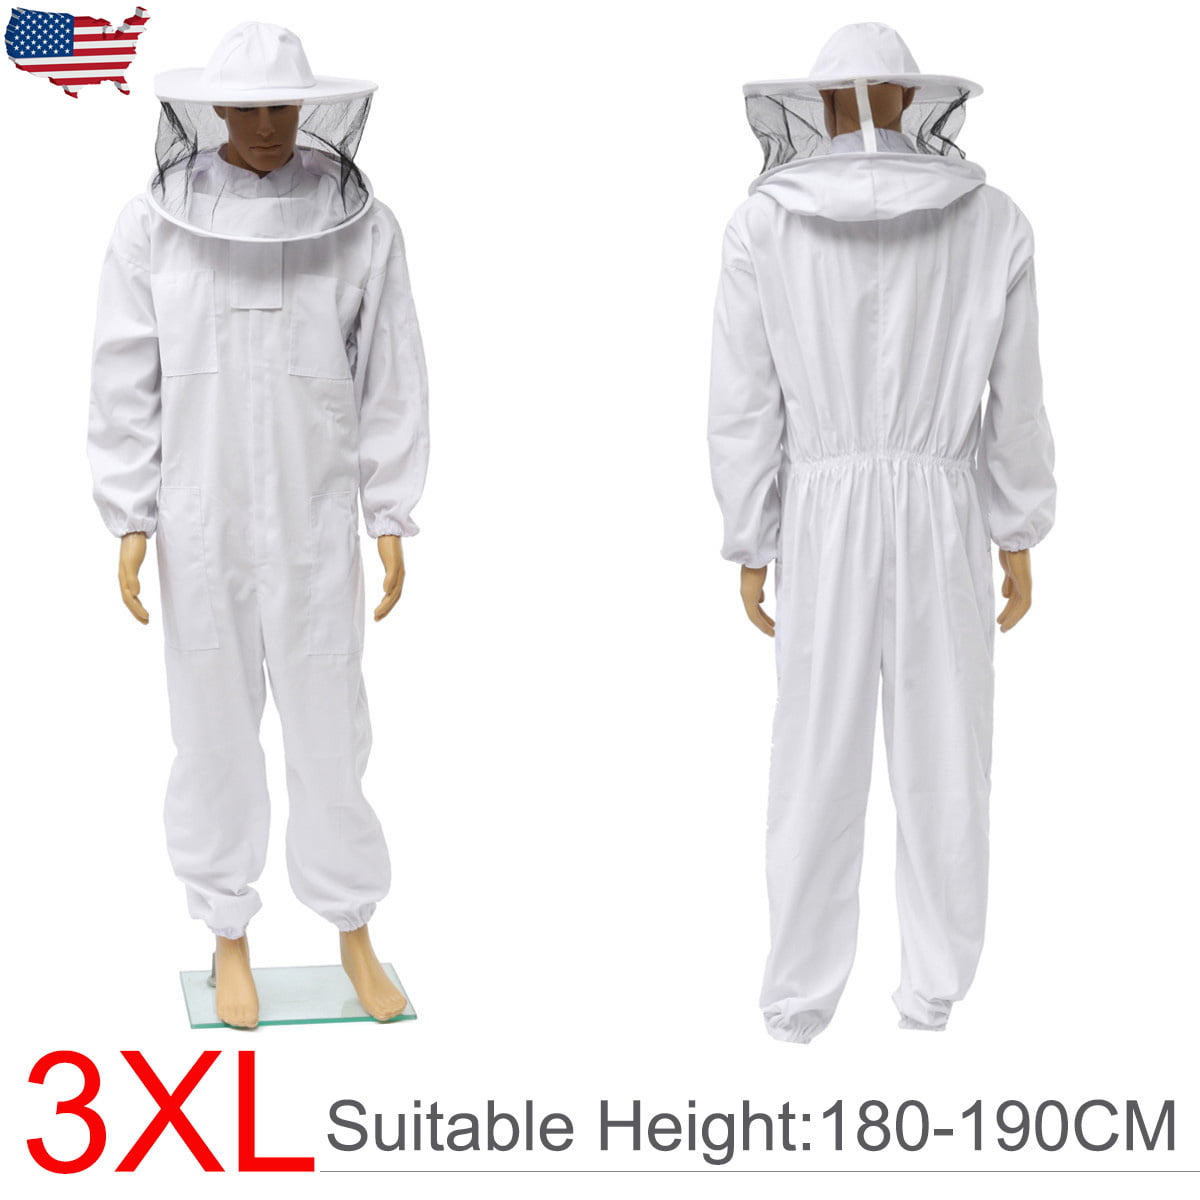 Beekeeper Protective Beekeeping Suit Safety Veil Hat All Body Smock Equipment